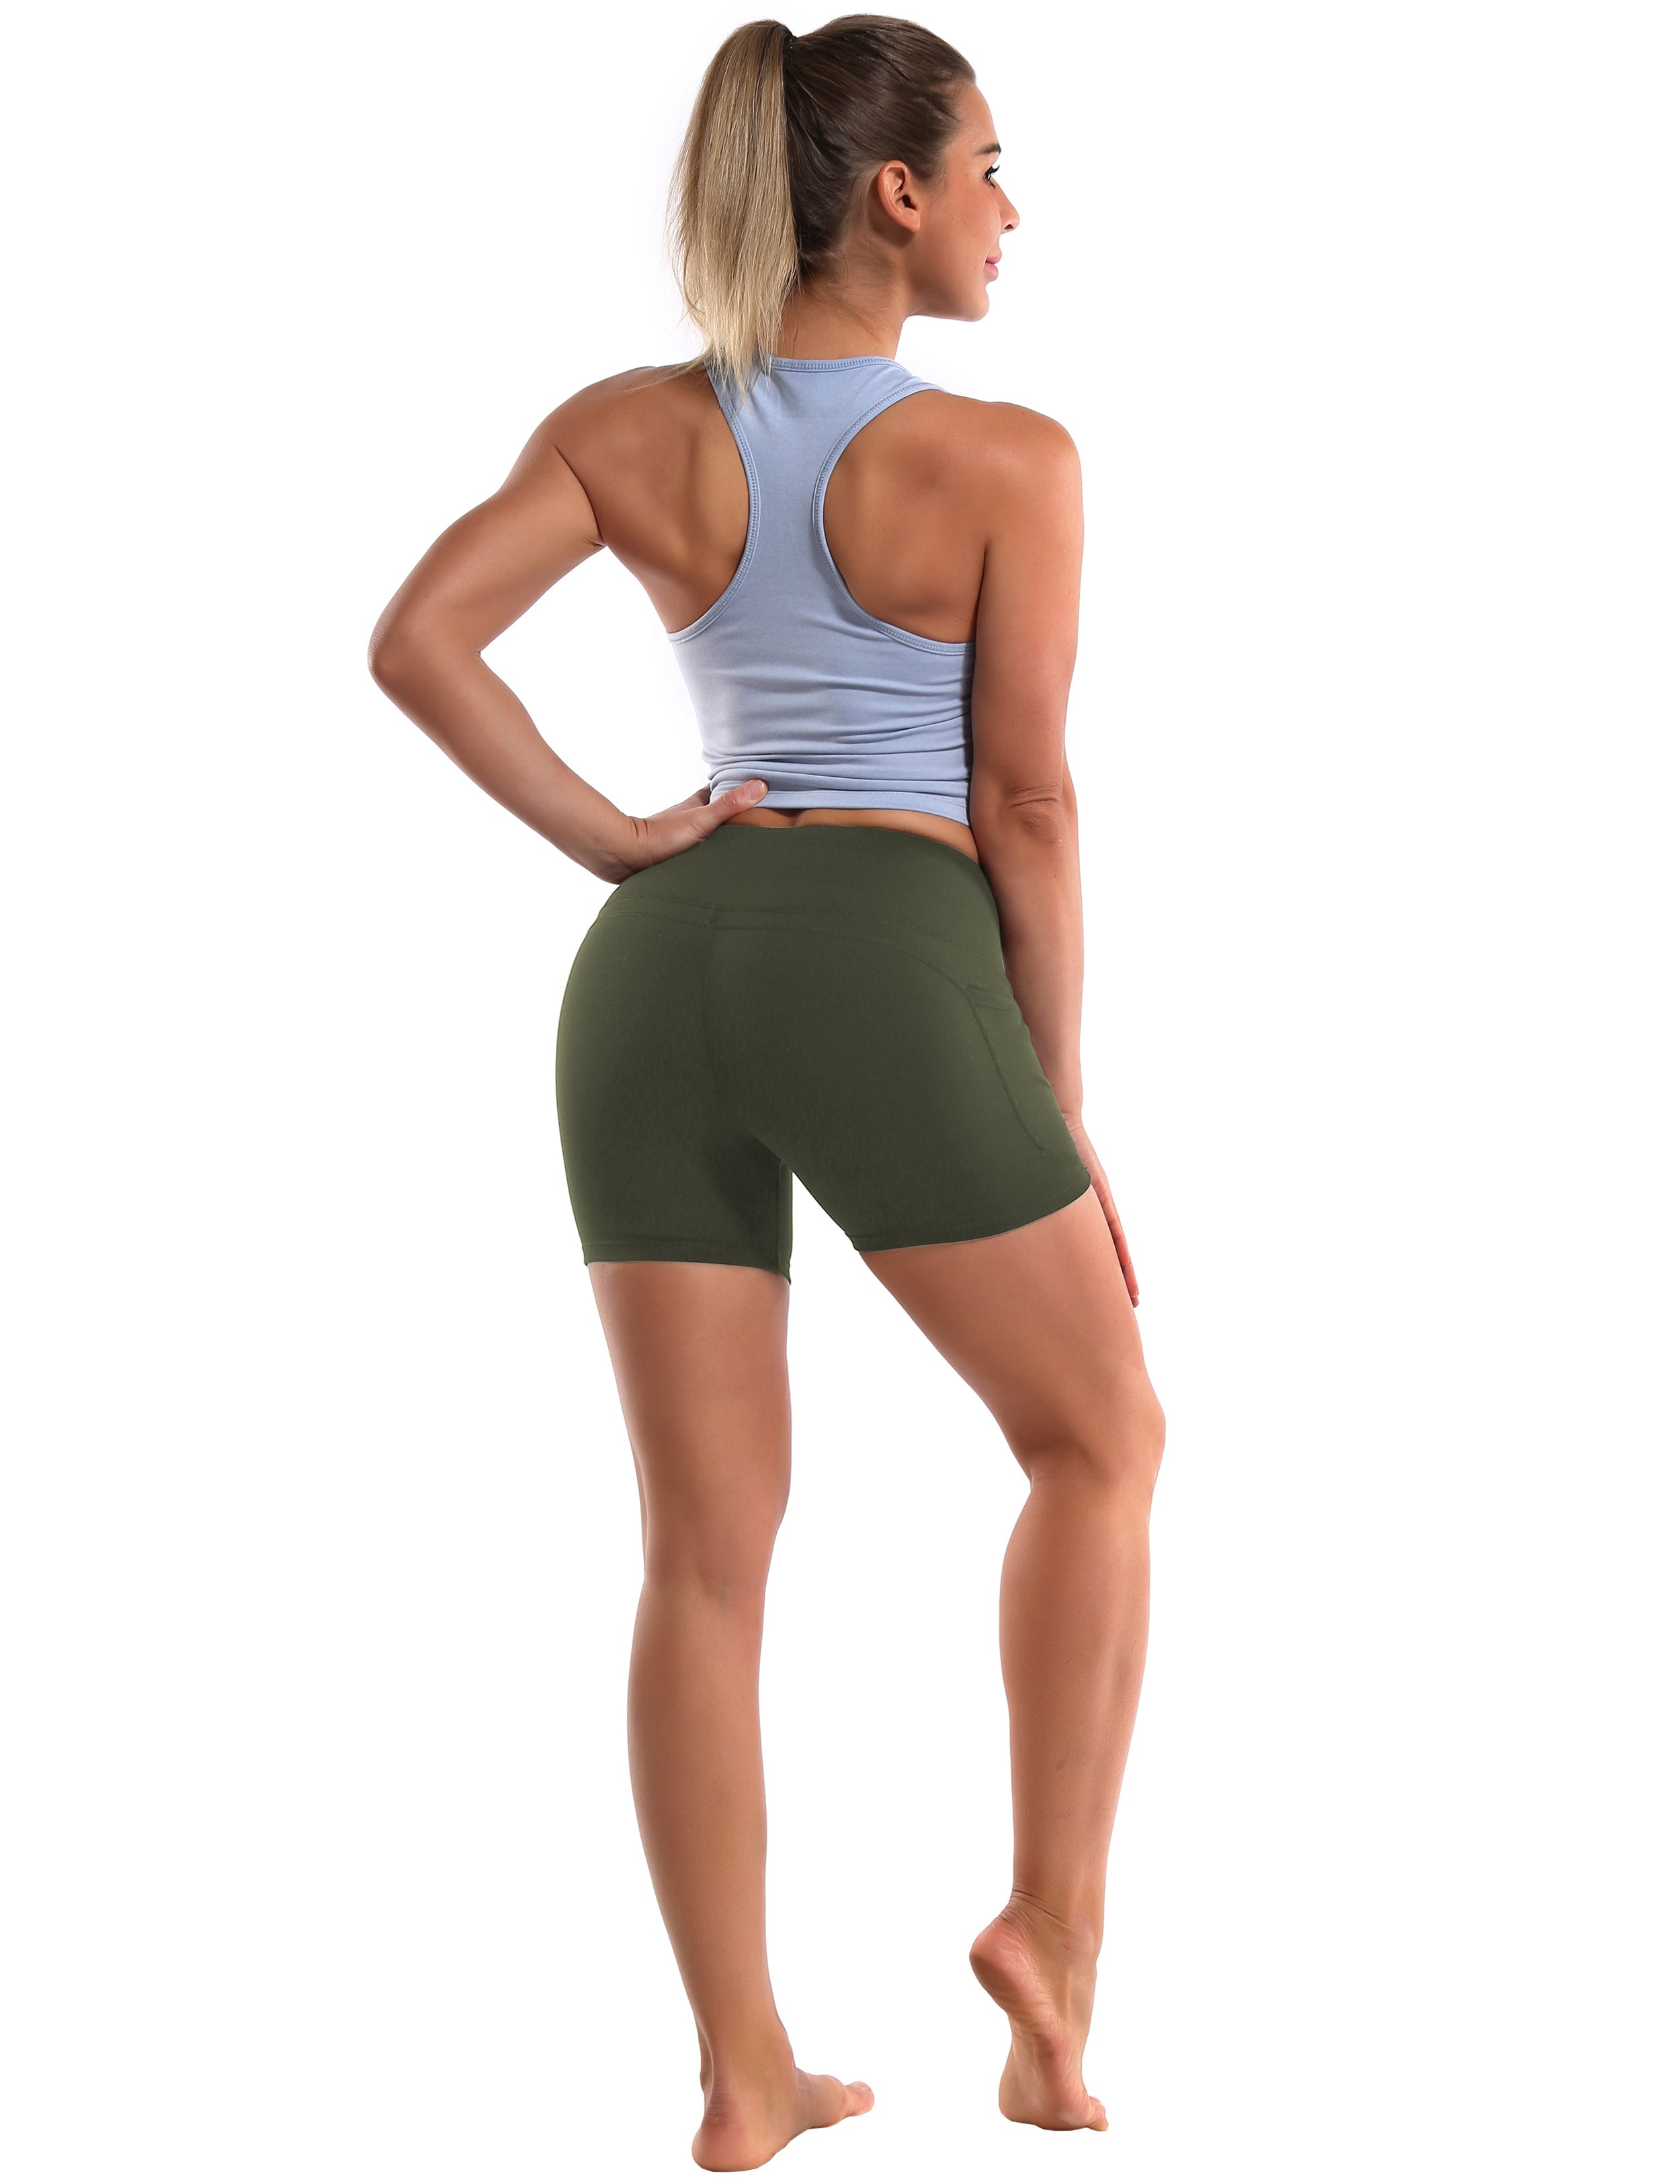 High Waist Side Pockets Biking Shorts green Softest-ever fabric High elasticity 4-way stretch Fabric doesn't attract lint easily No see-through Moisture-wicking Machine wash 88% Nylon, 12% Spandex